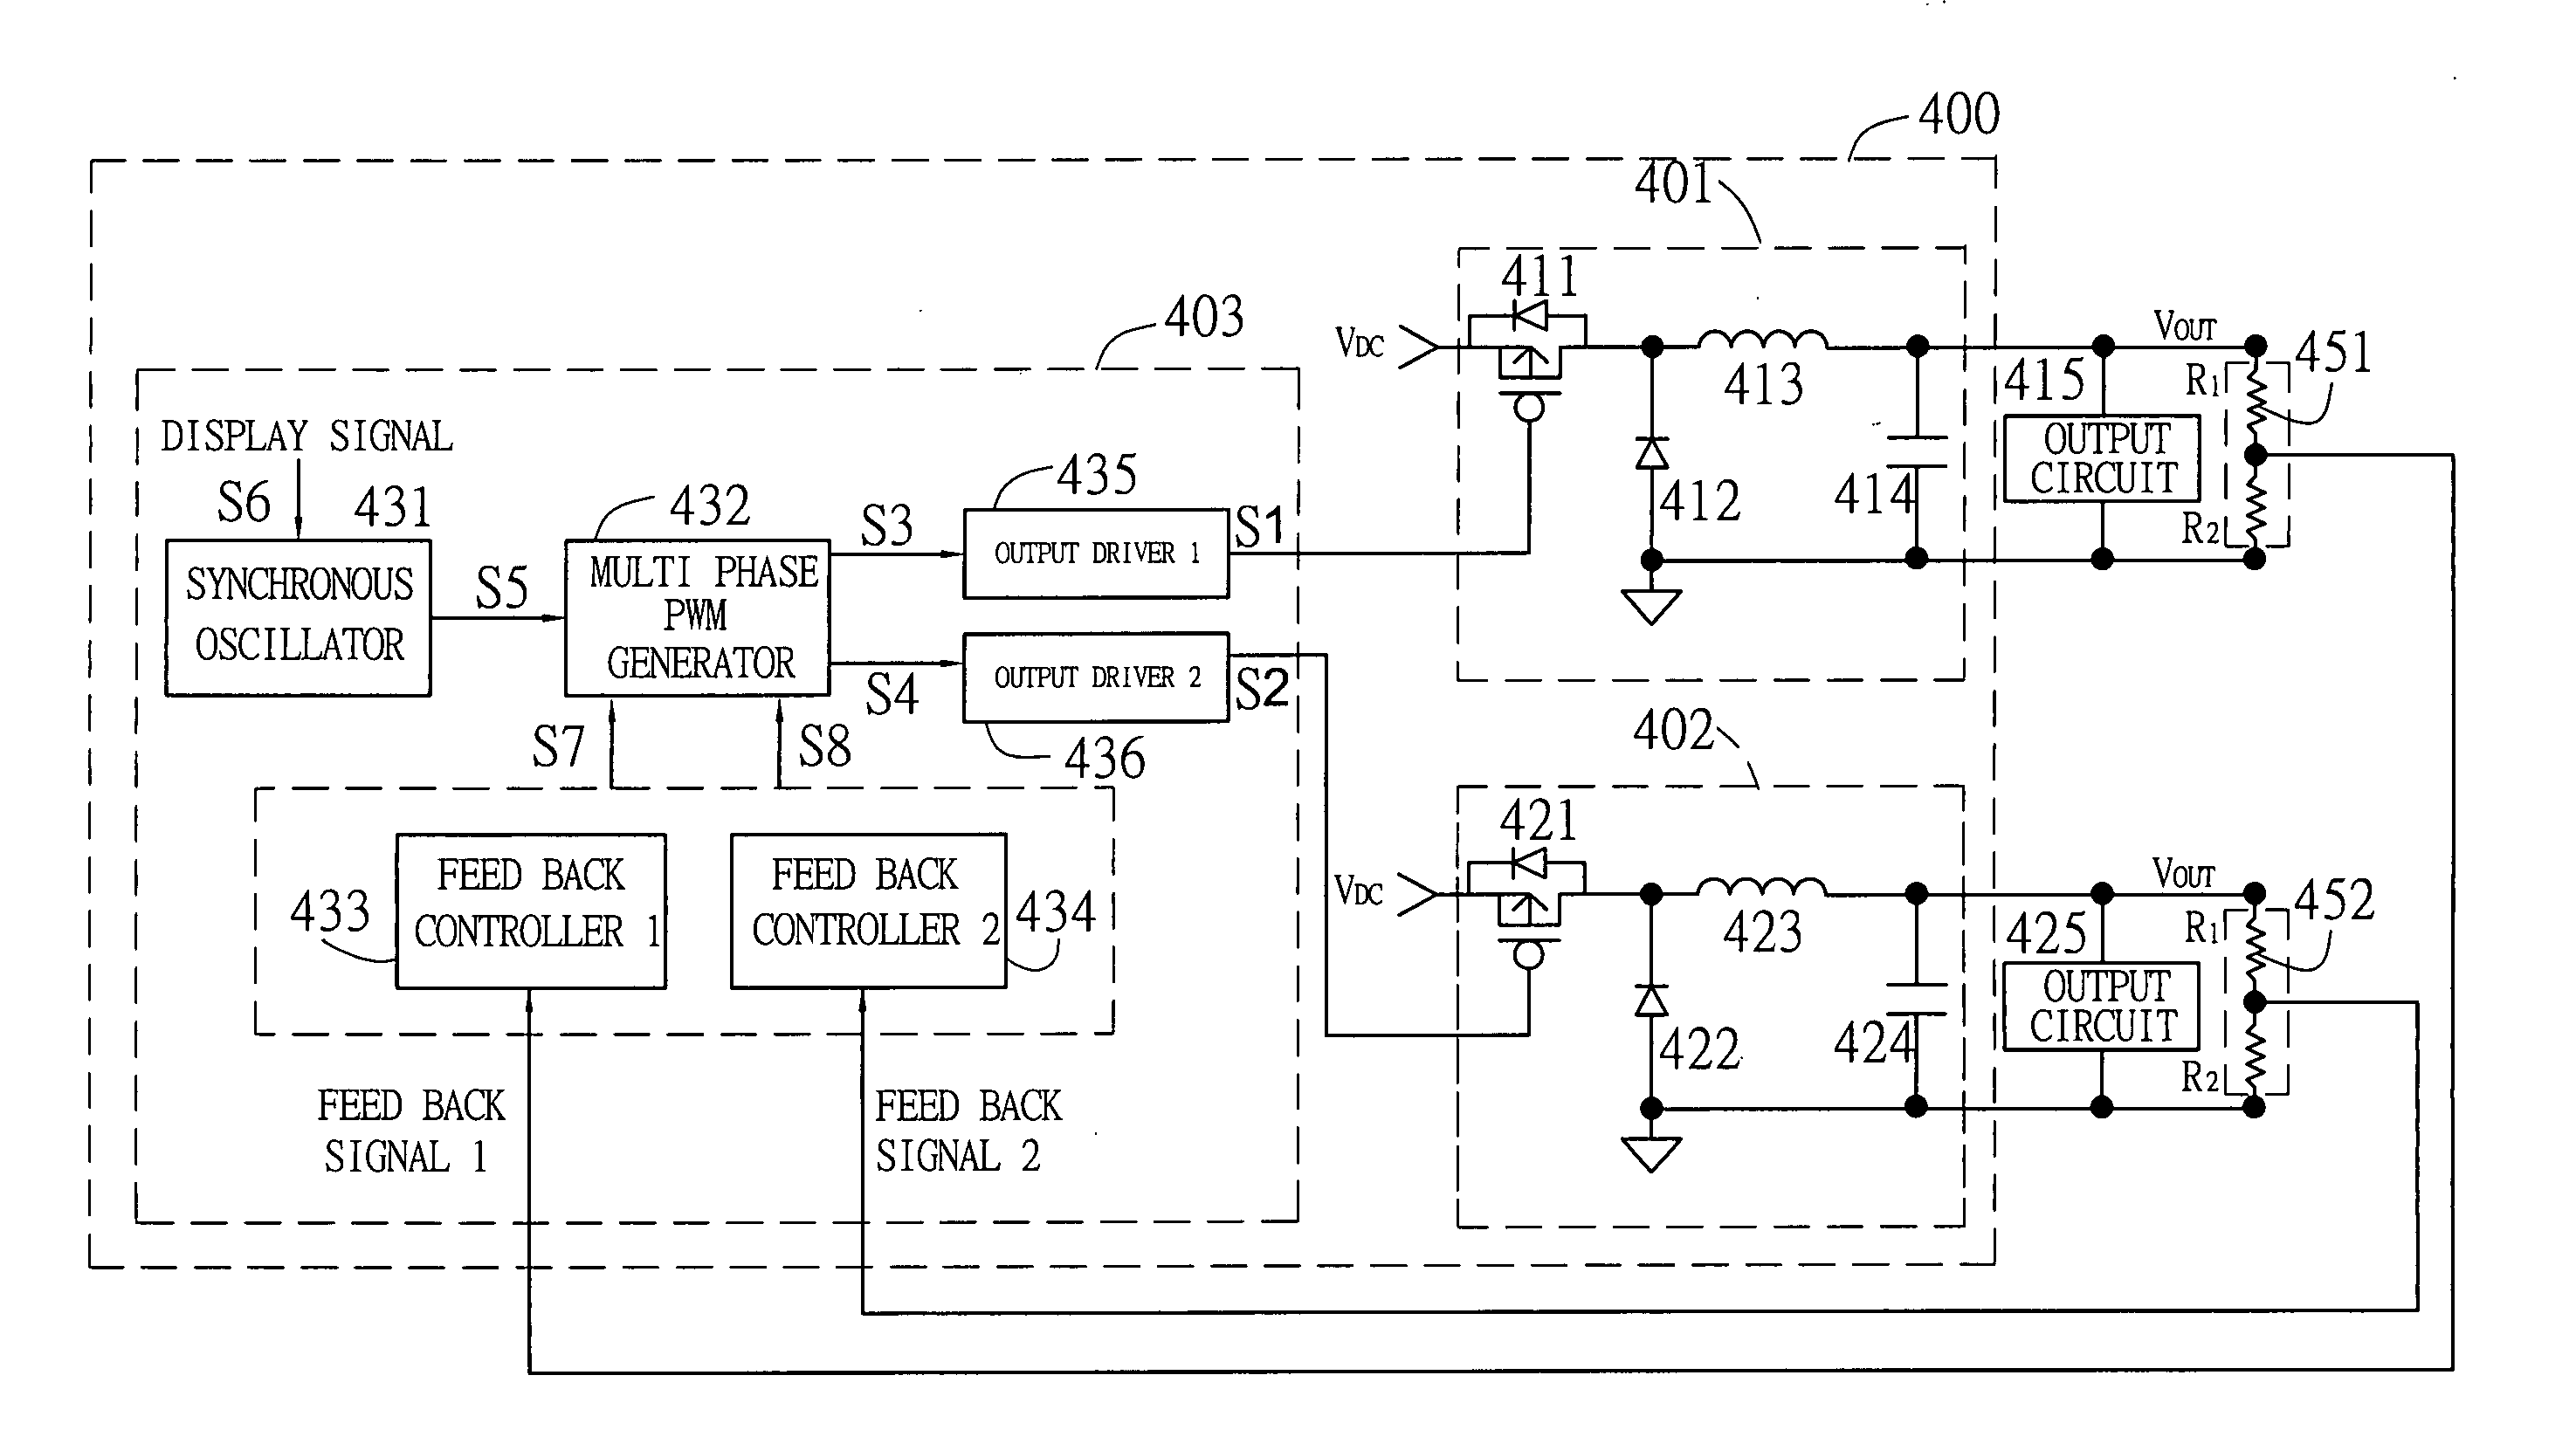 Circuits and methods for synchronizing multi-phase converter with display signal of LCD device